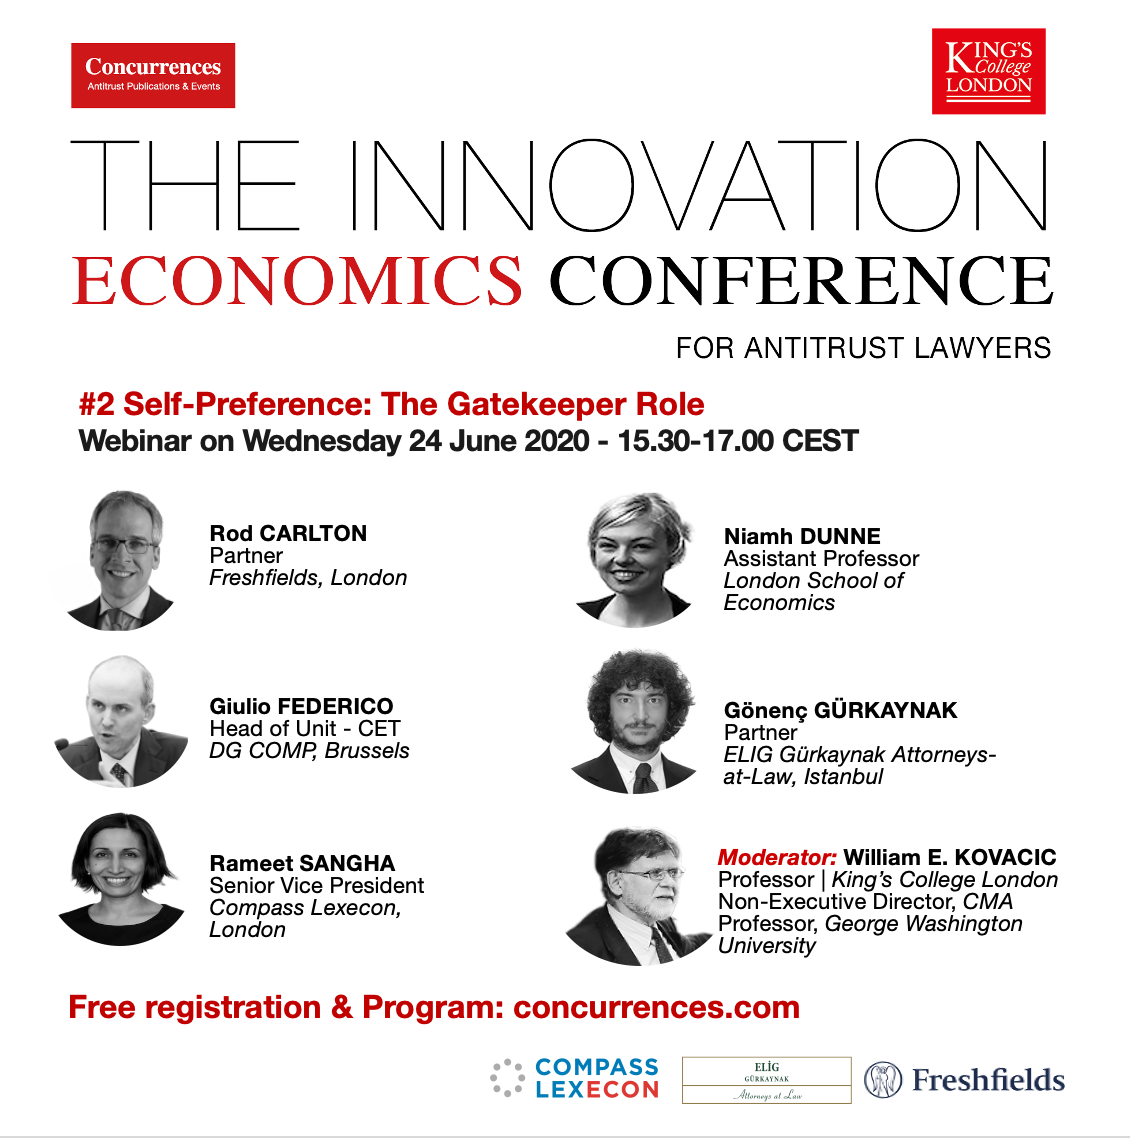 4th Innovation Economics Conference organized by Concurrences